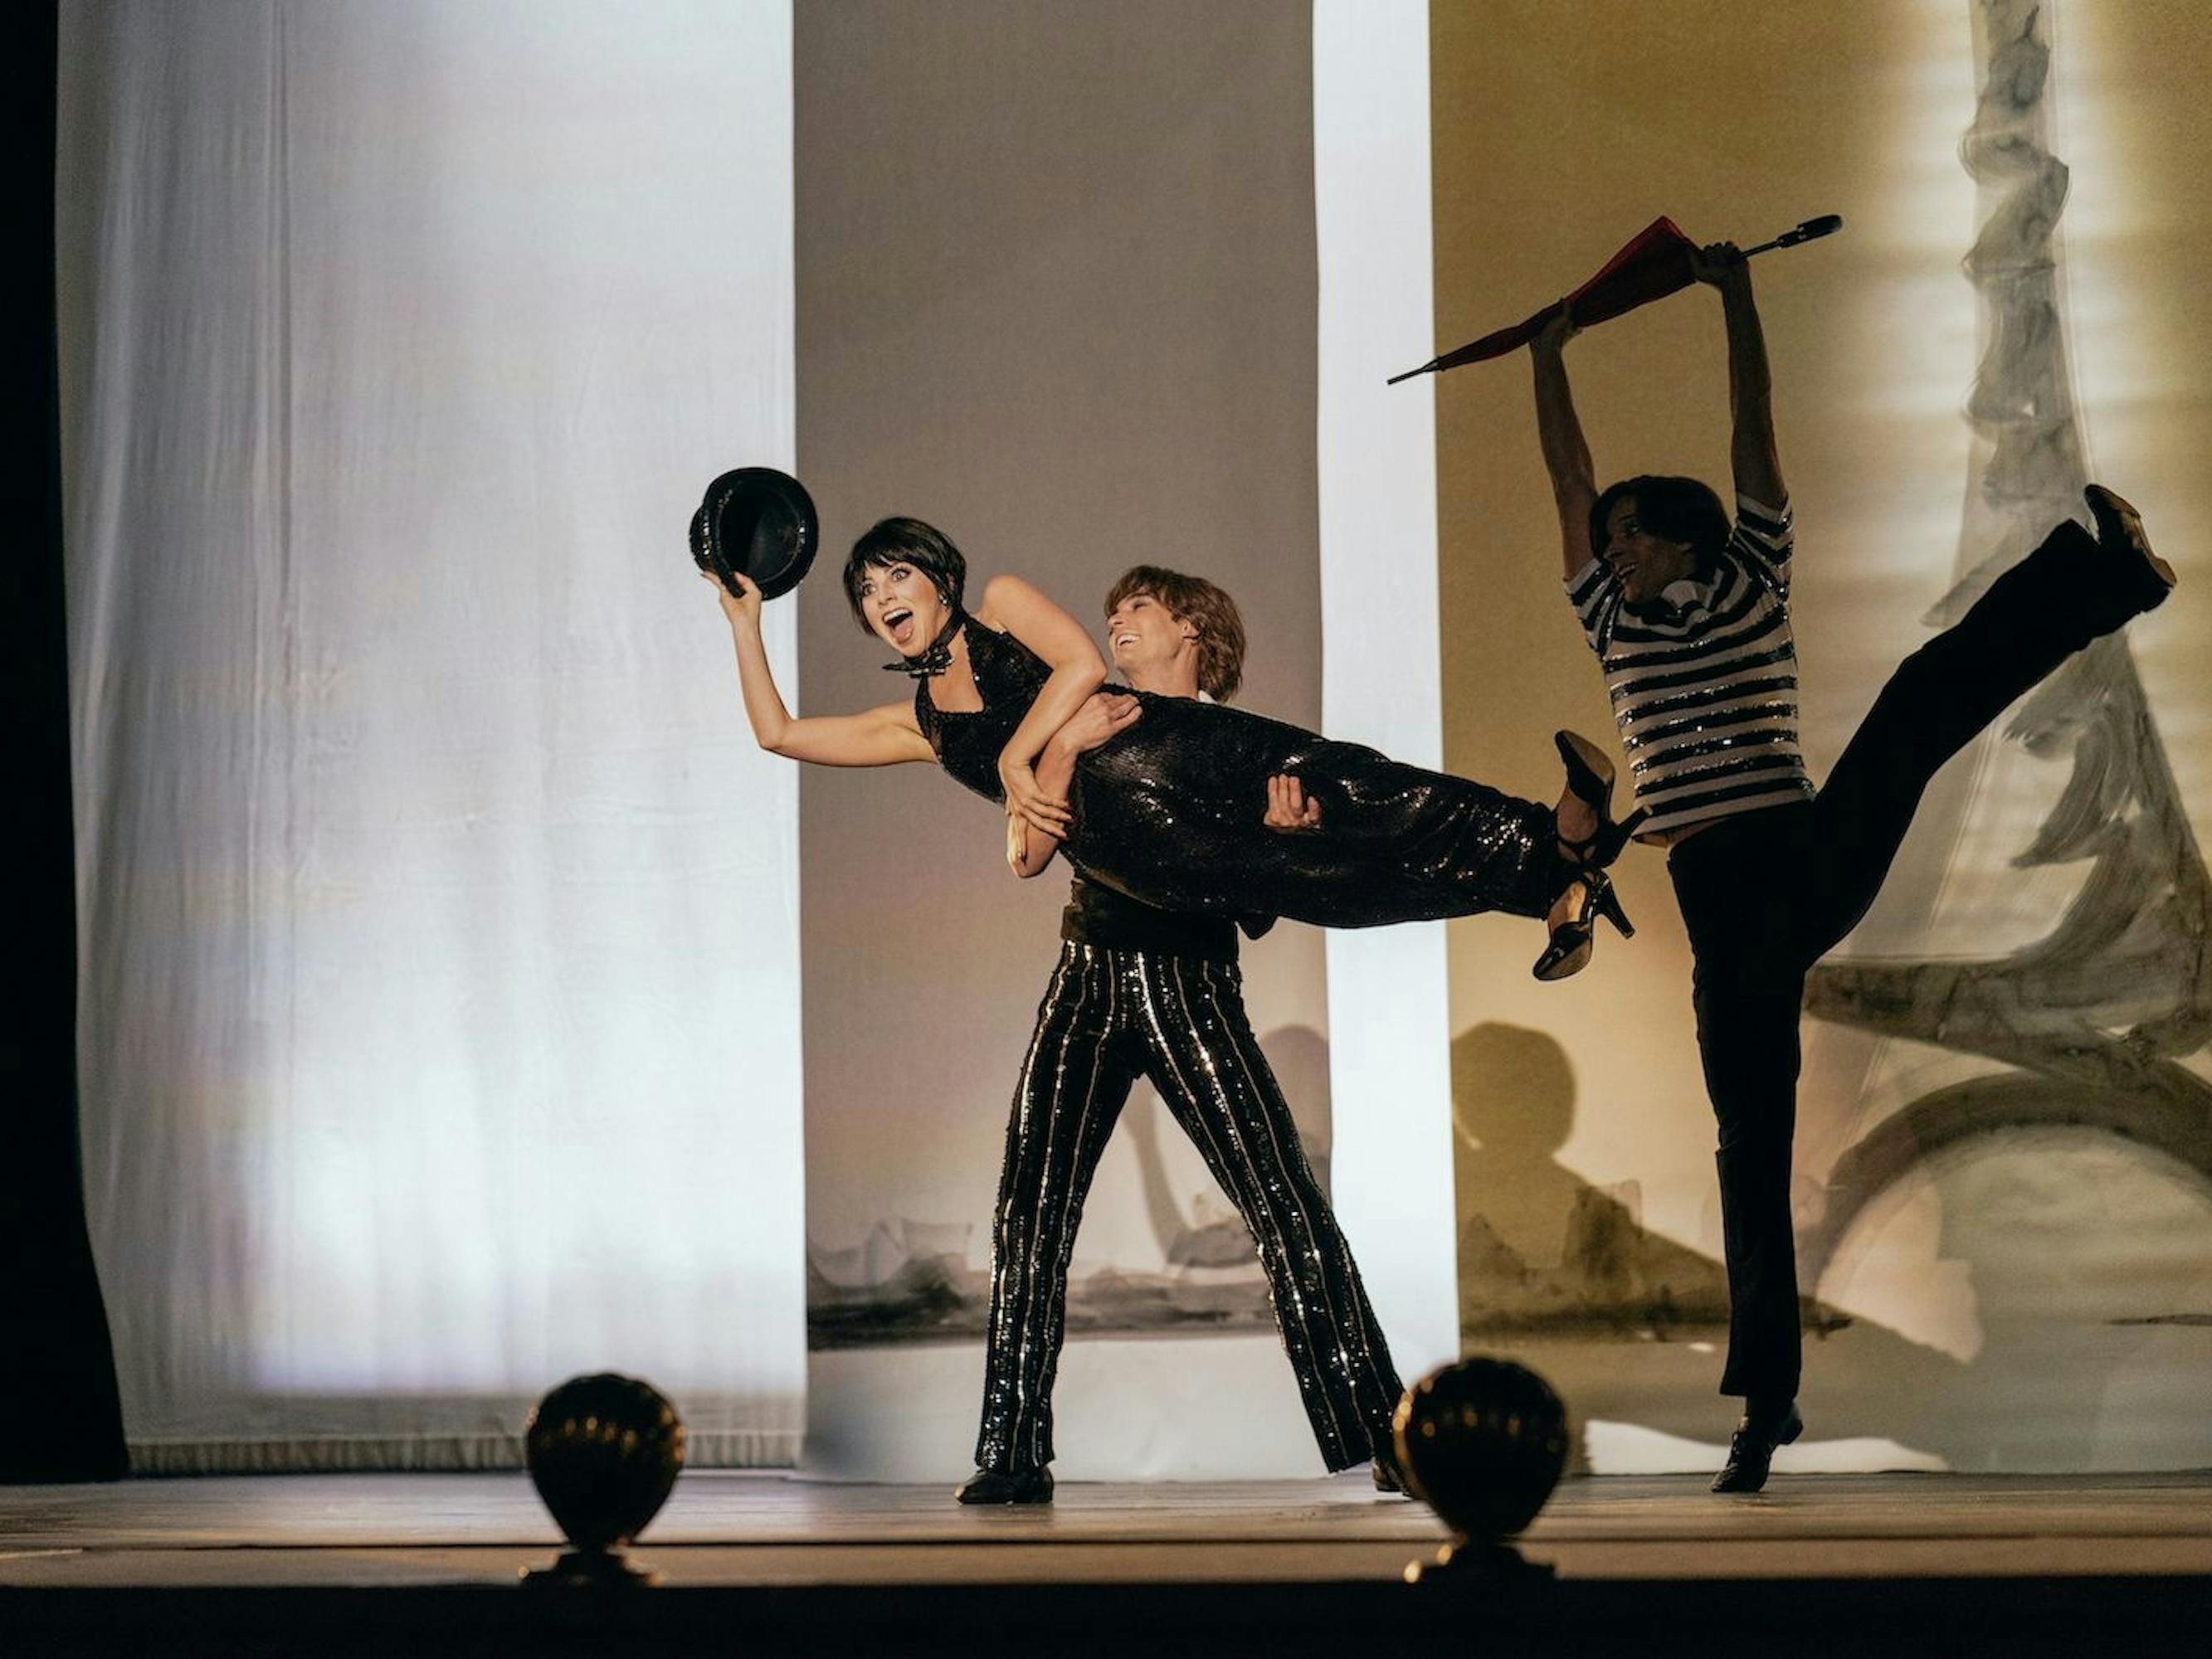 Liza Minnelli (Krysta Rodriguez) is held horizontally by a person wearing leather pants. Her mouth is wide, she brandishes a black hat that matches her black ensemble. The shot was taken mid-show, as we’re able to distinguish audience heads below.